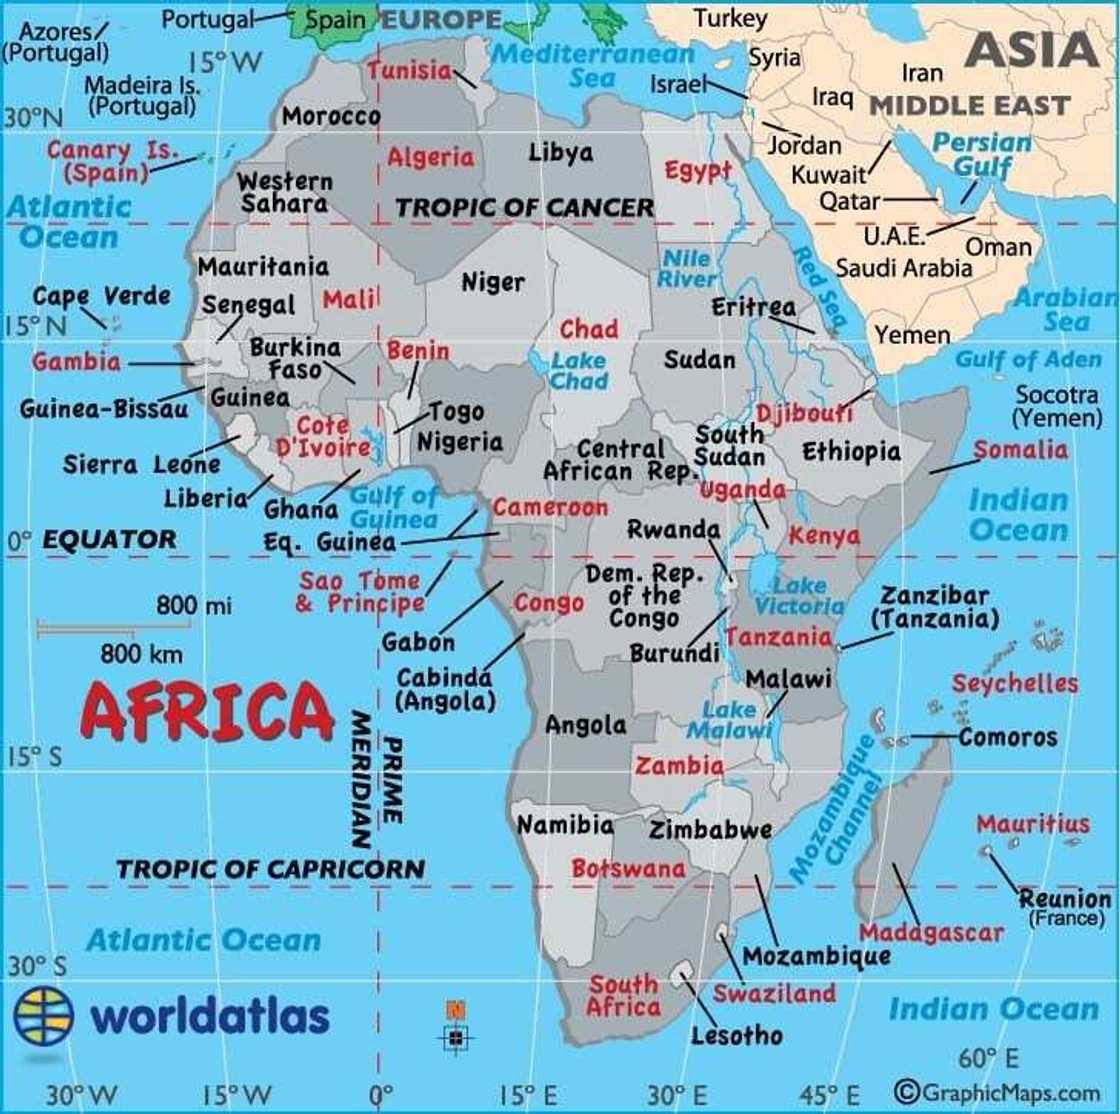 countries in west africa
west africa map
how many countries are in west africa
map of west africa